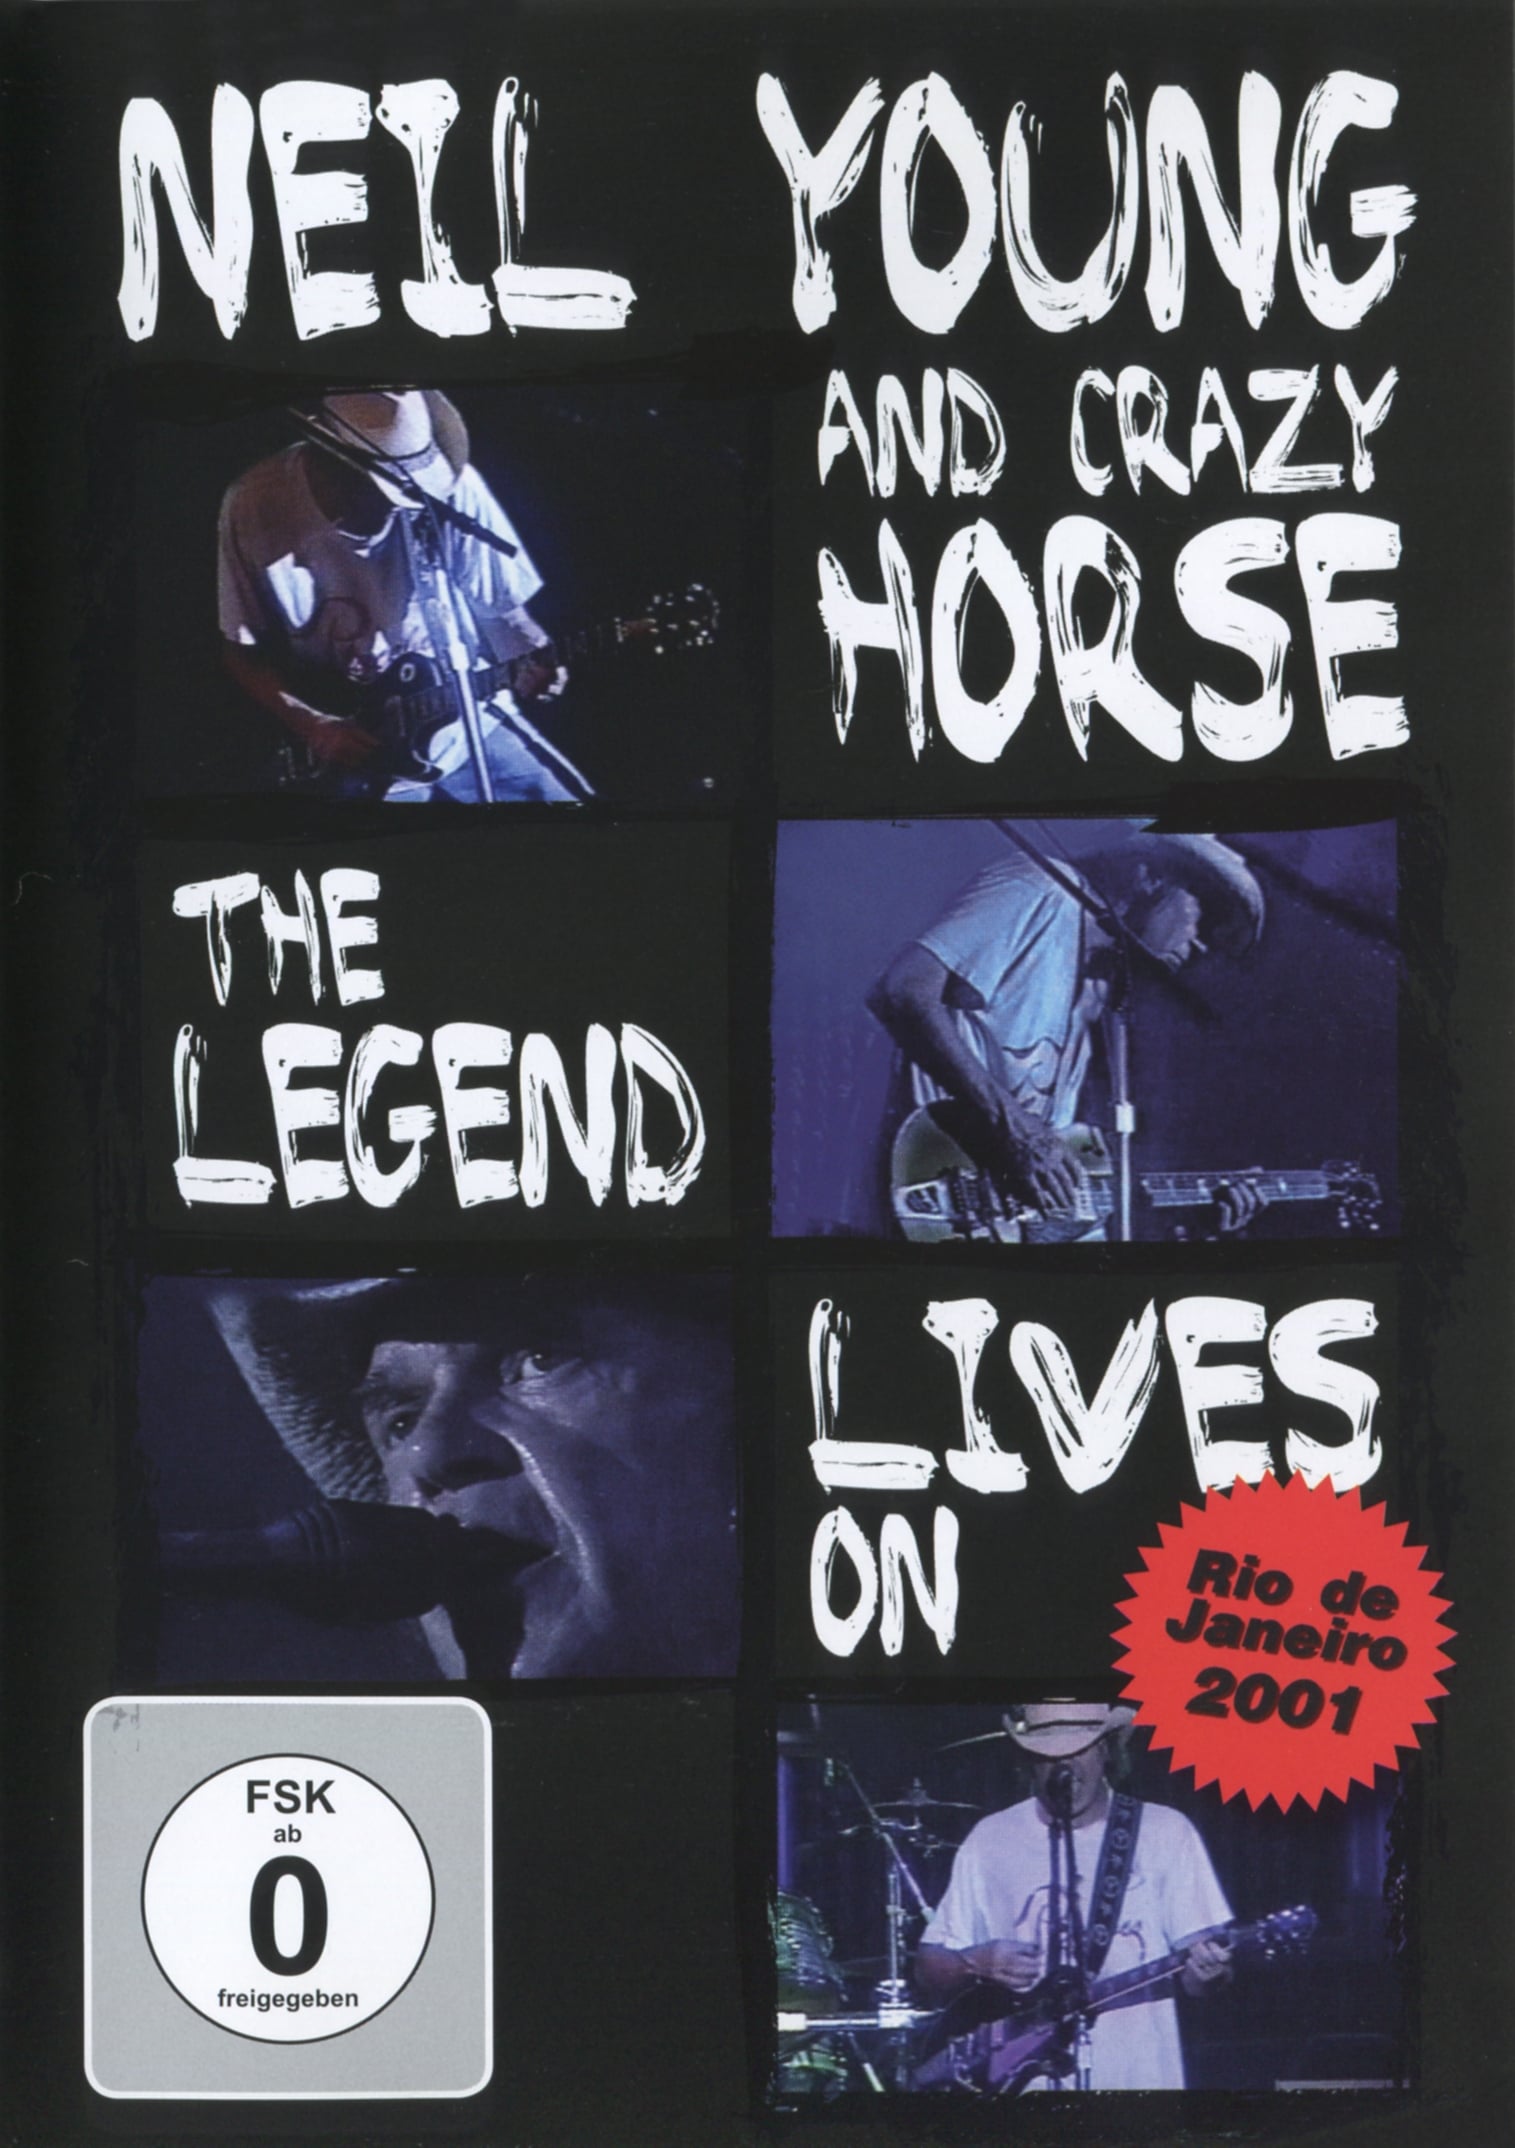 Neil Young & Crazy Horse - The Legend Lives On